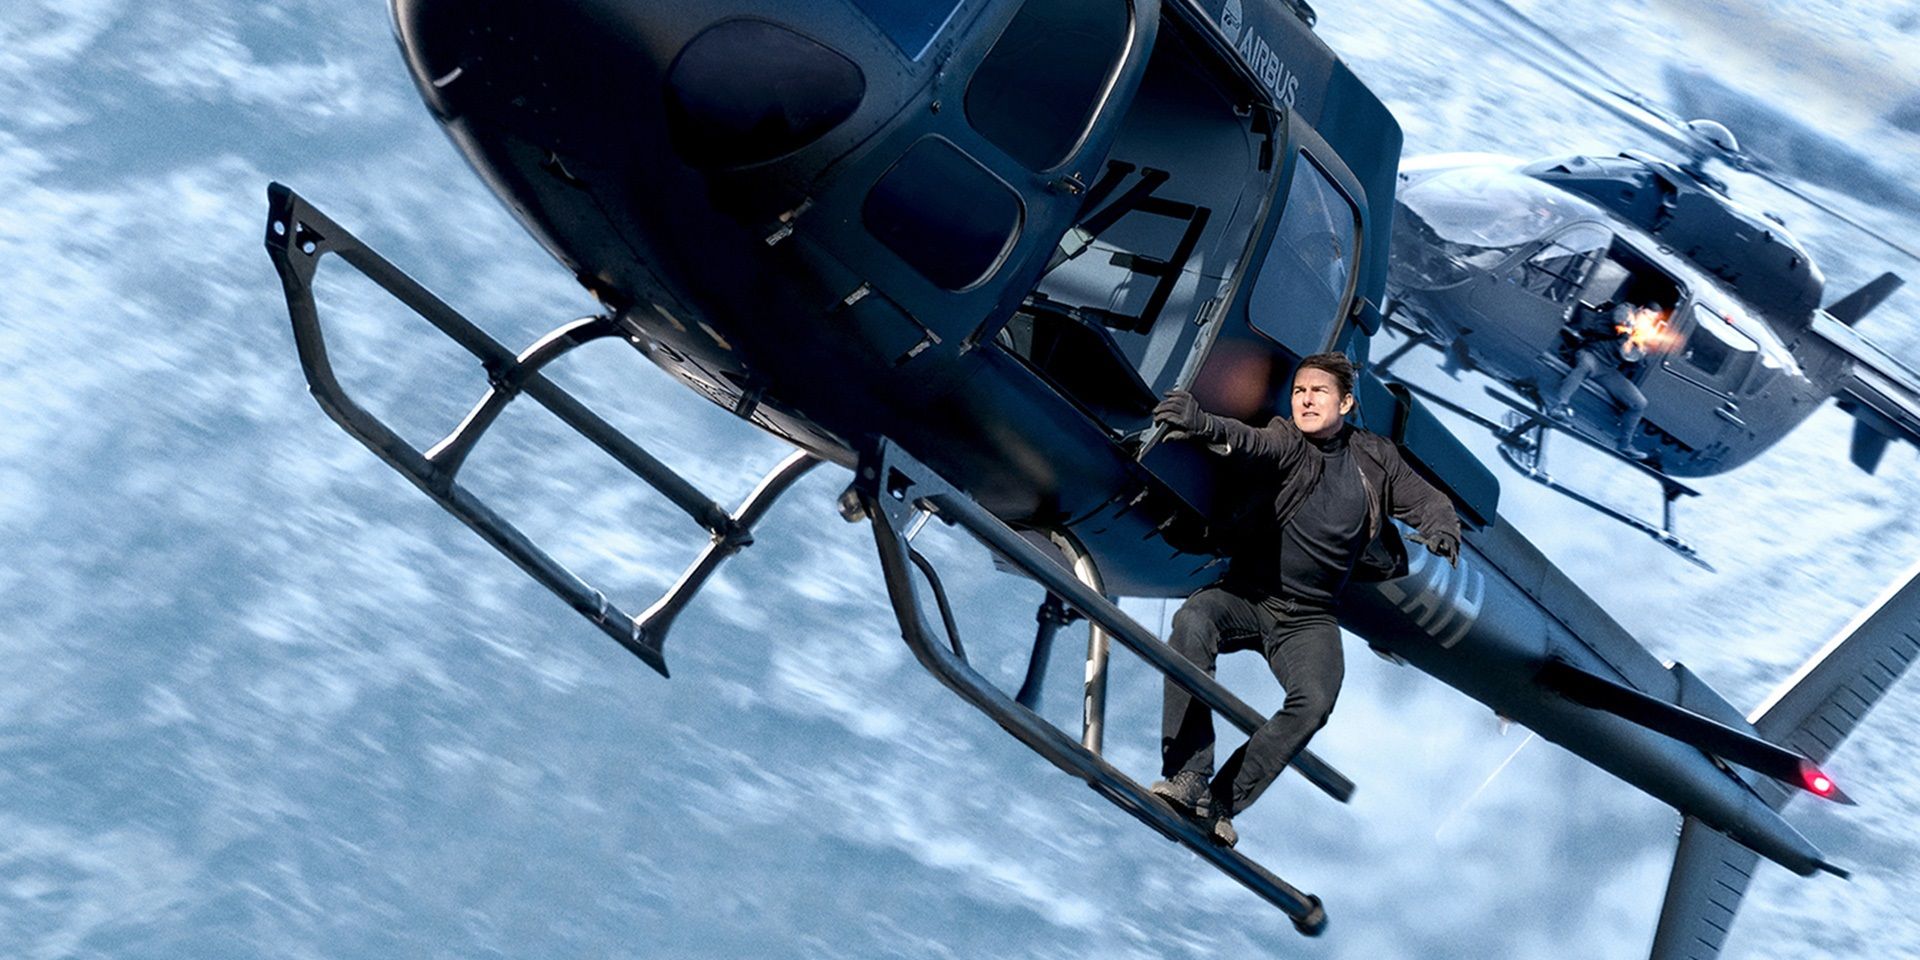 Tom Cruise hanging off a helicopter in Mission Impossible Fallout